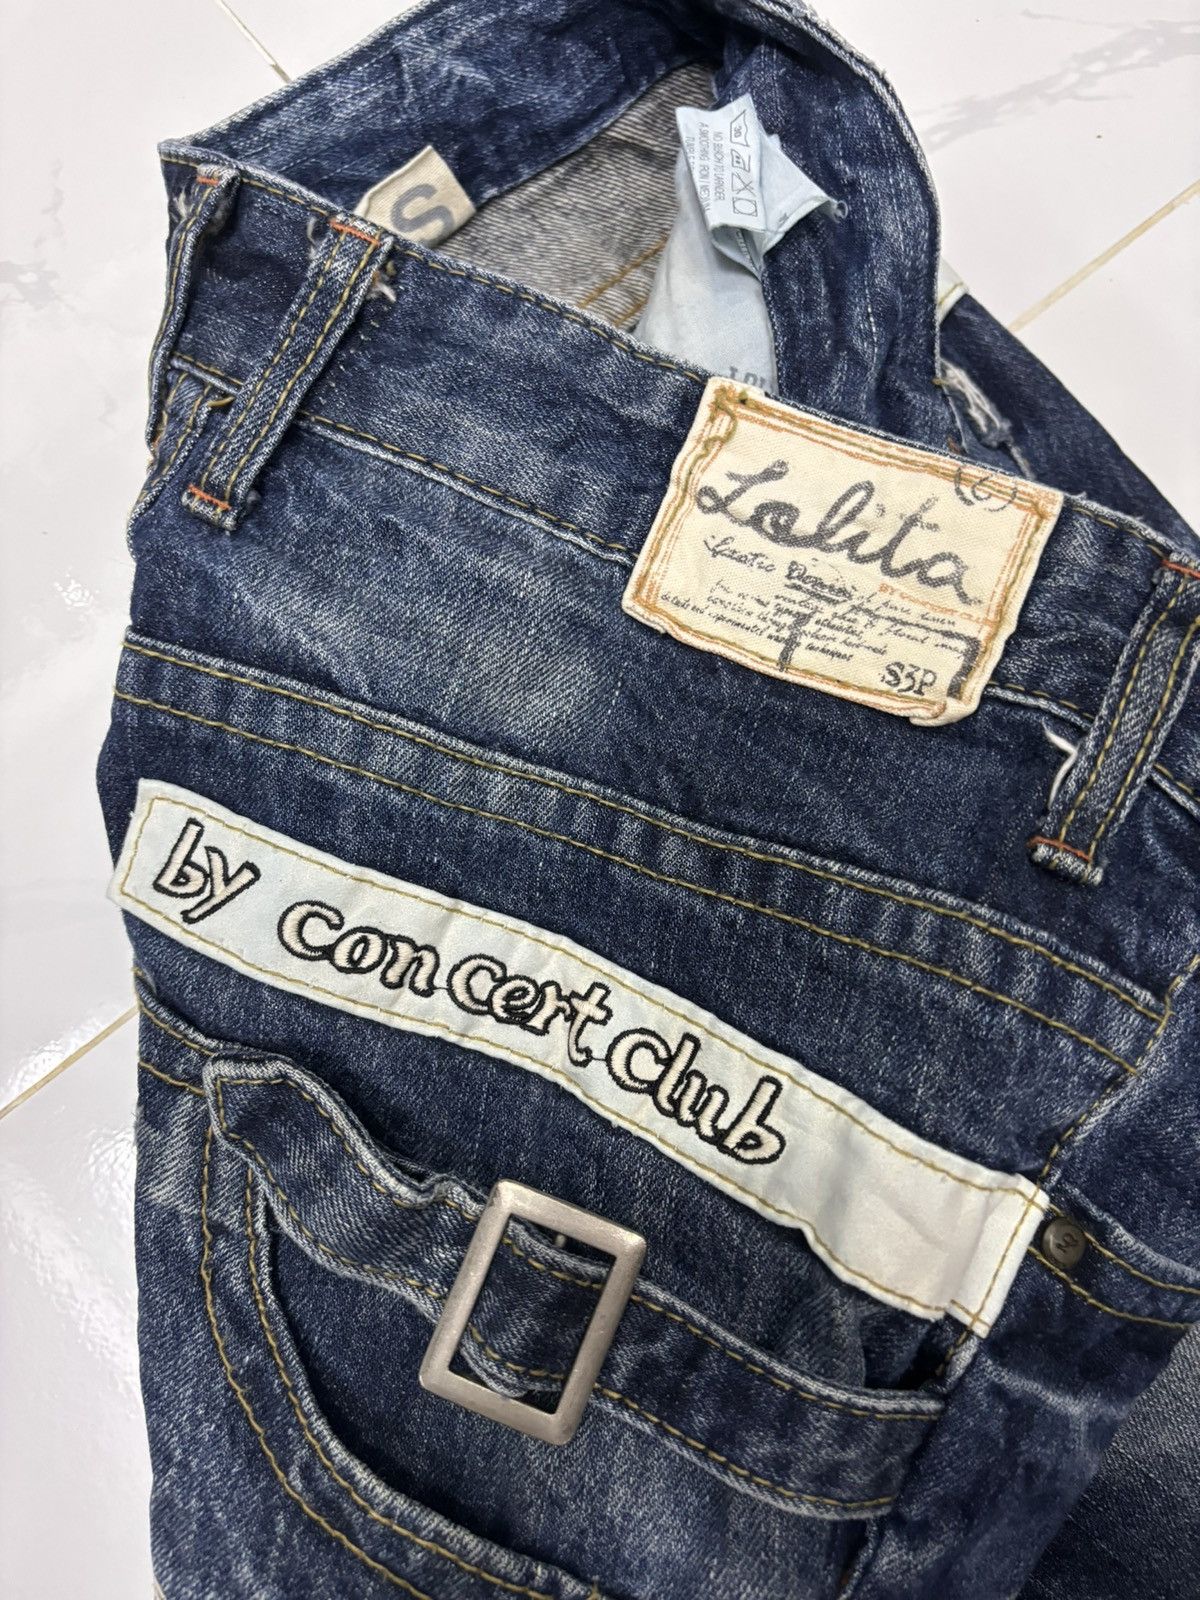 Archival Clothing - 🔥VINTAGE LOLITA BY CONCERT CLUB DISTRESSED DENIM JEANS - 9